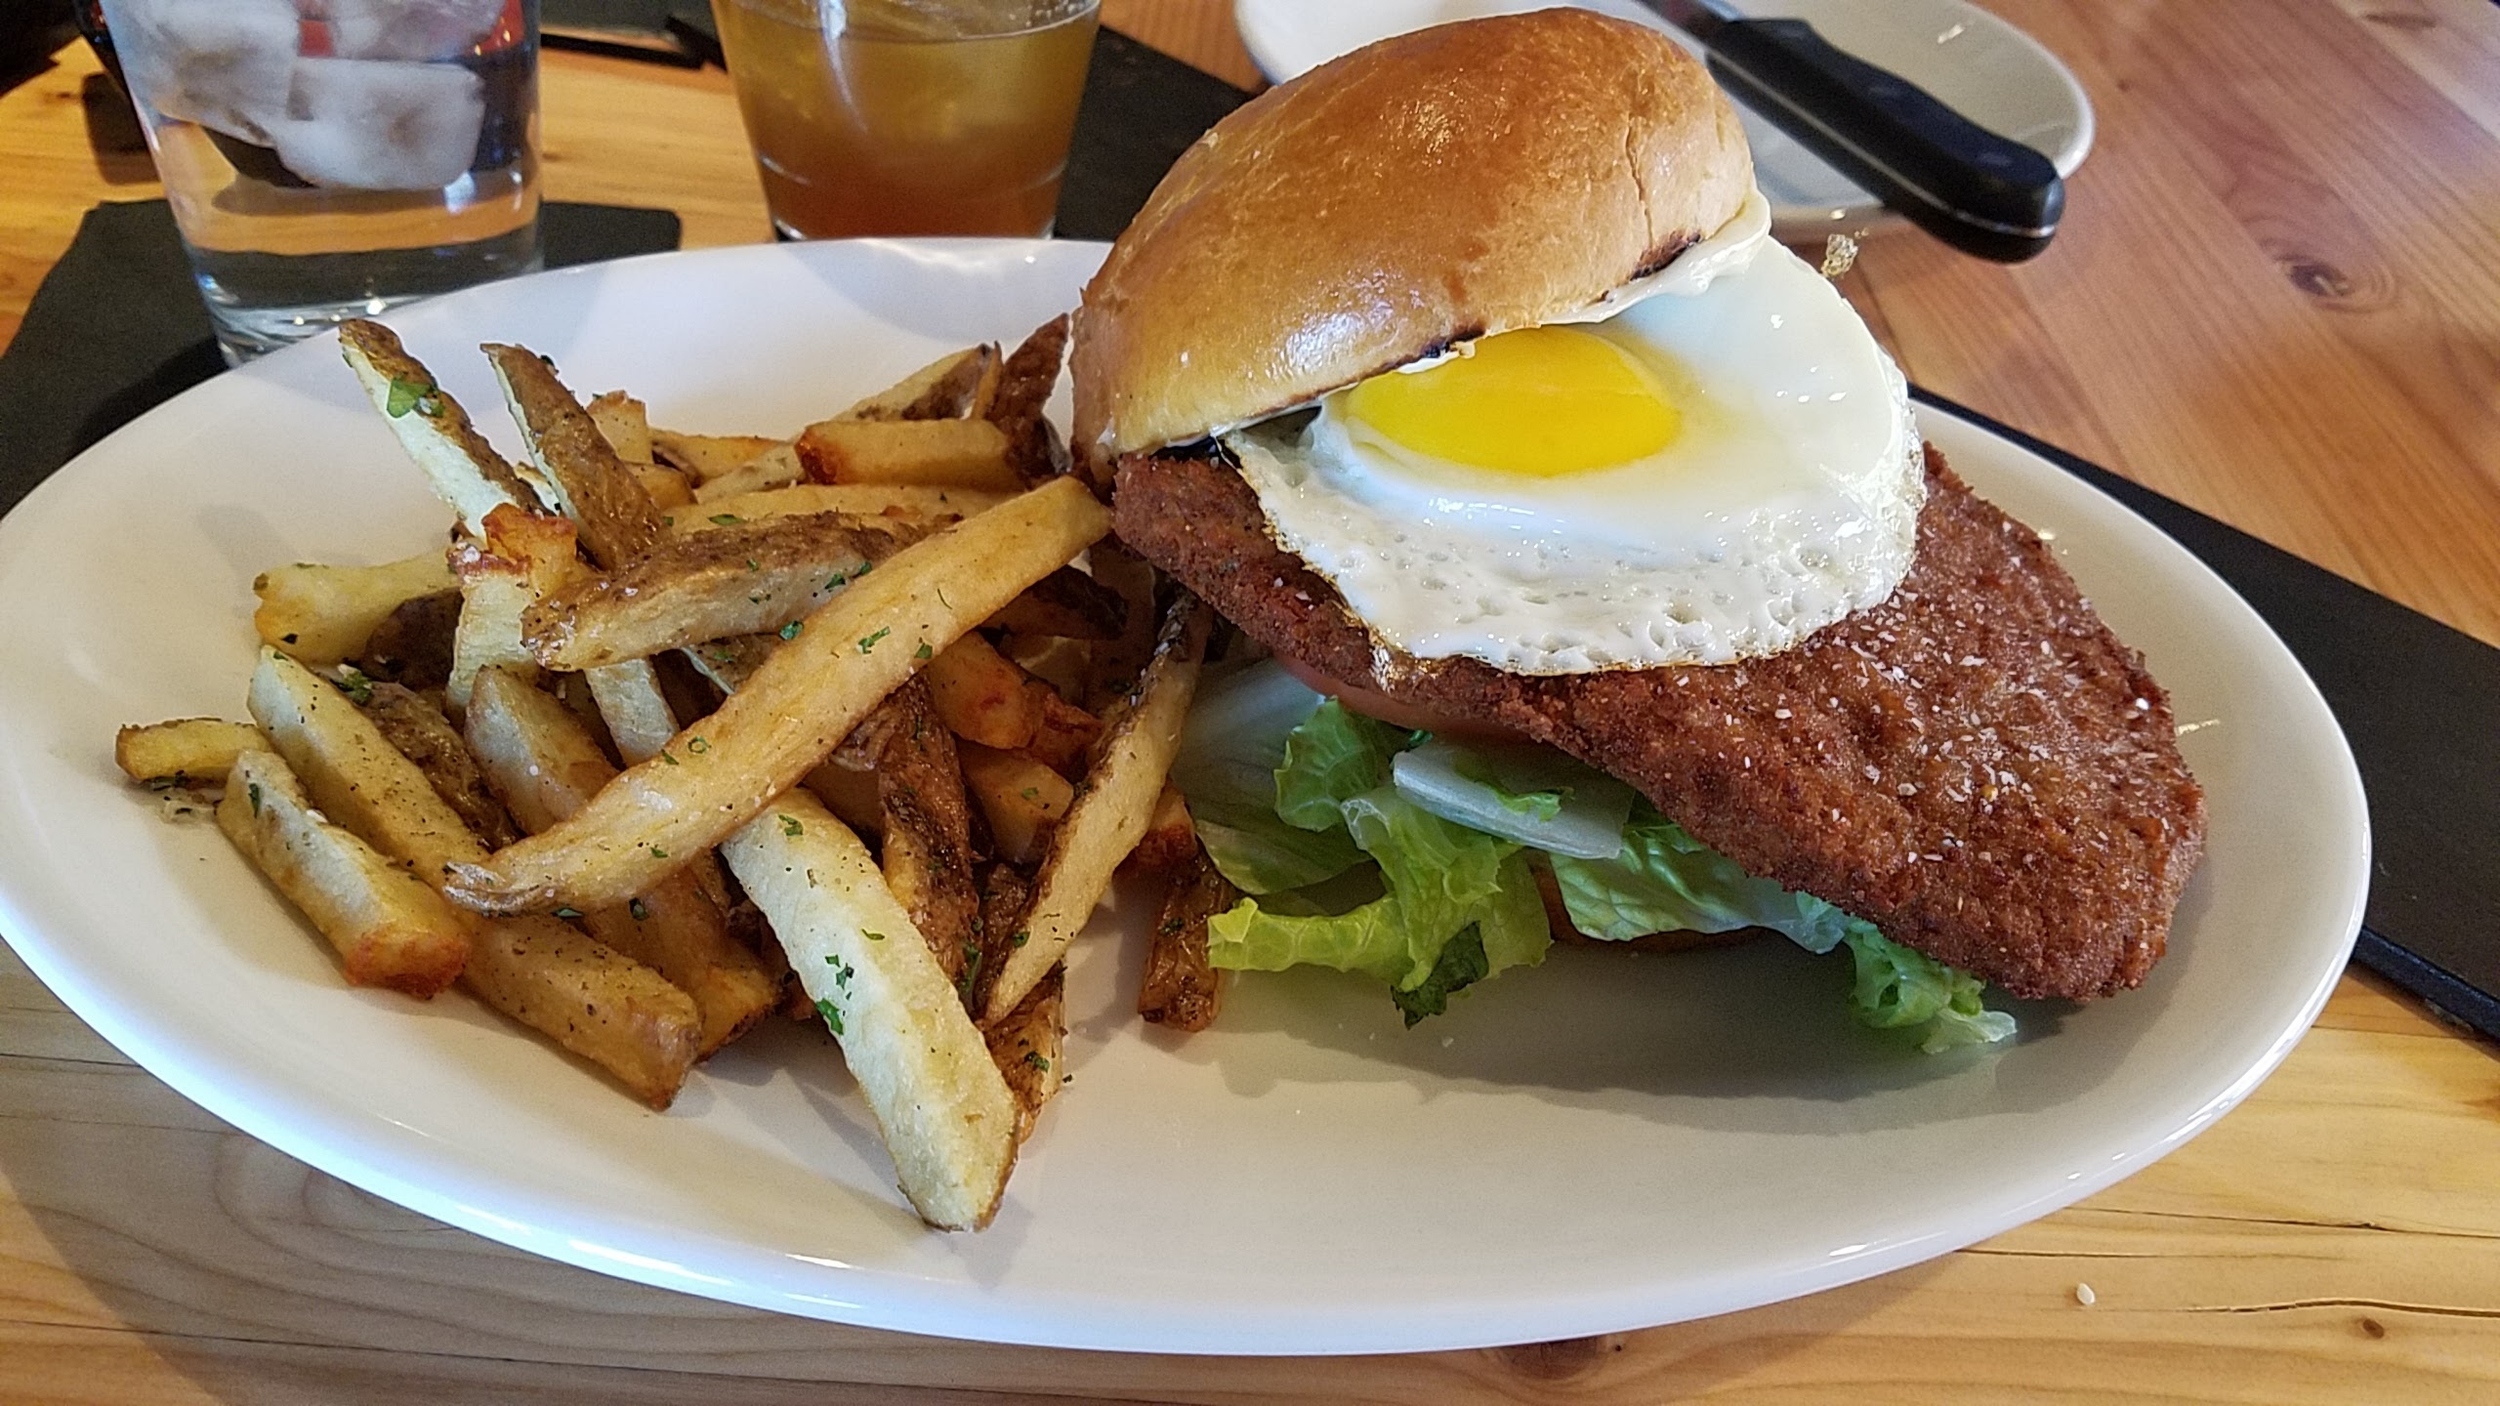 Beef milanesa sandwich topped with a fried egg